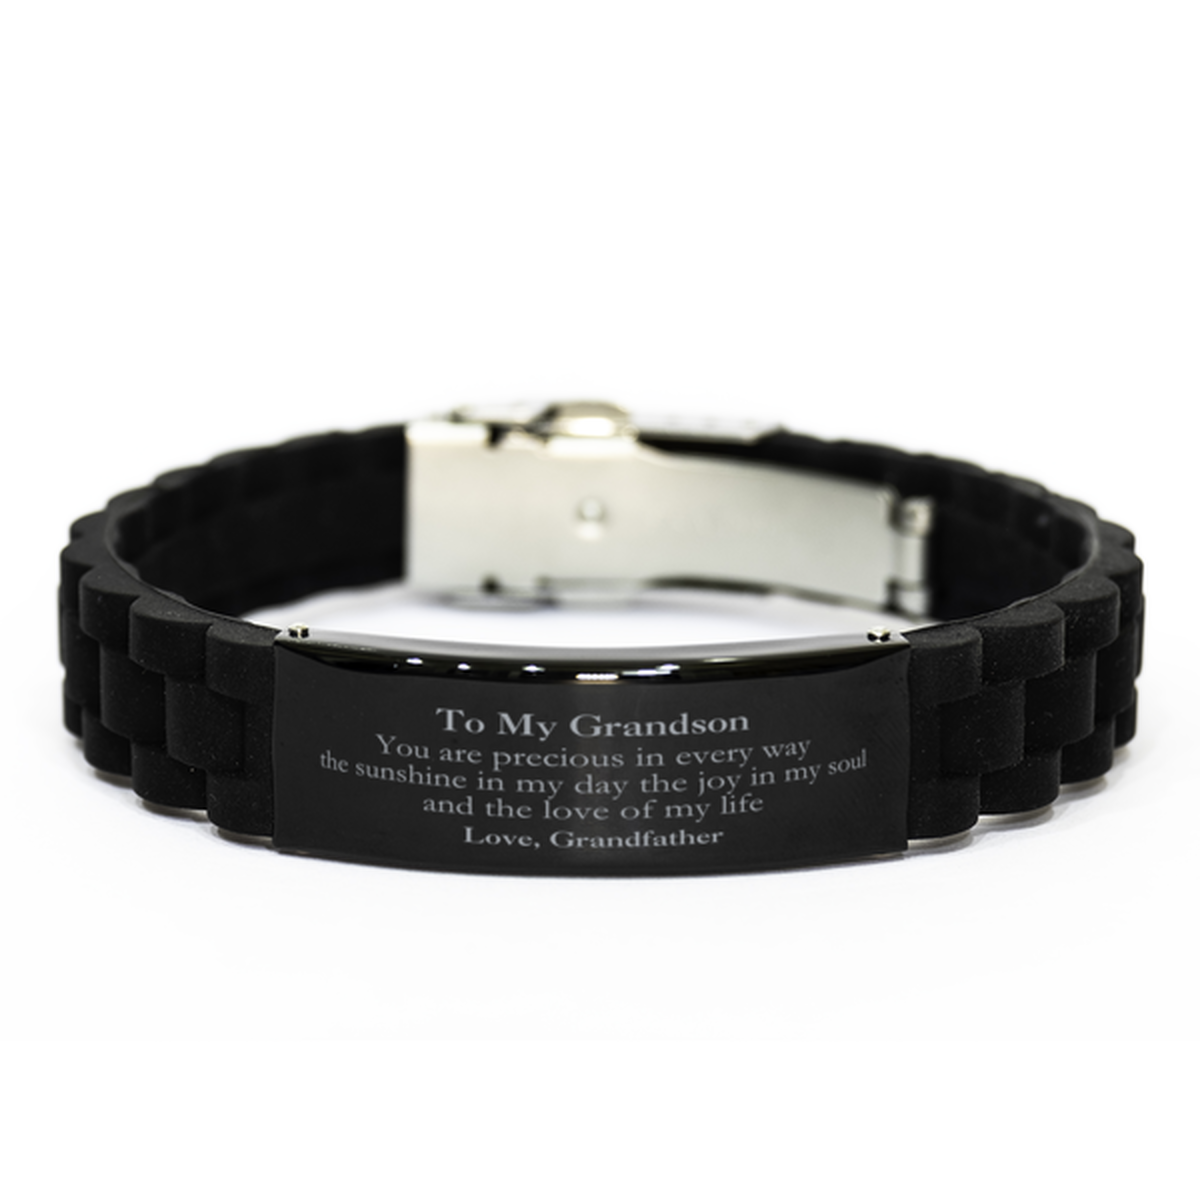 Graduation Gifts for Grandson Black Glidelock Clasp Bracelet Present from Grandfather, Christmas Grandson Birthday Gifts Grandson You are precious in every way the sunshine in my day. Love, Grandfather